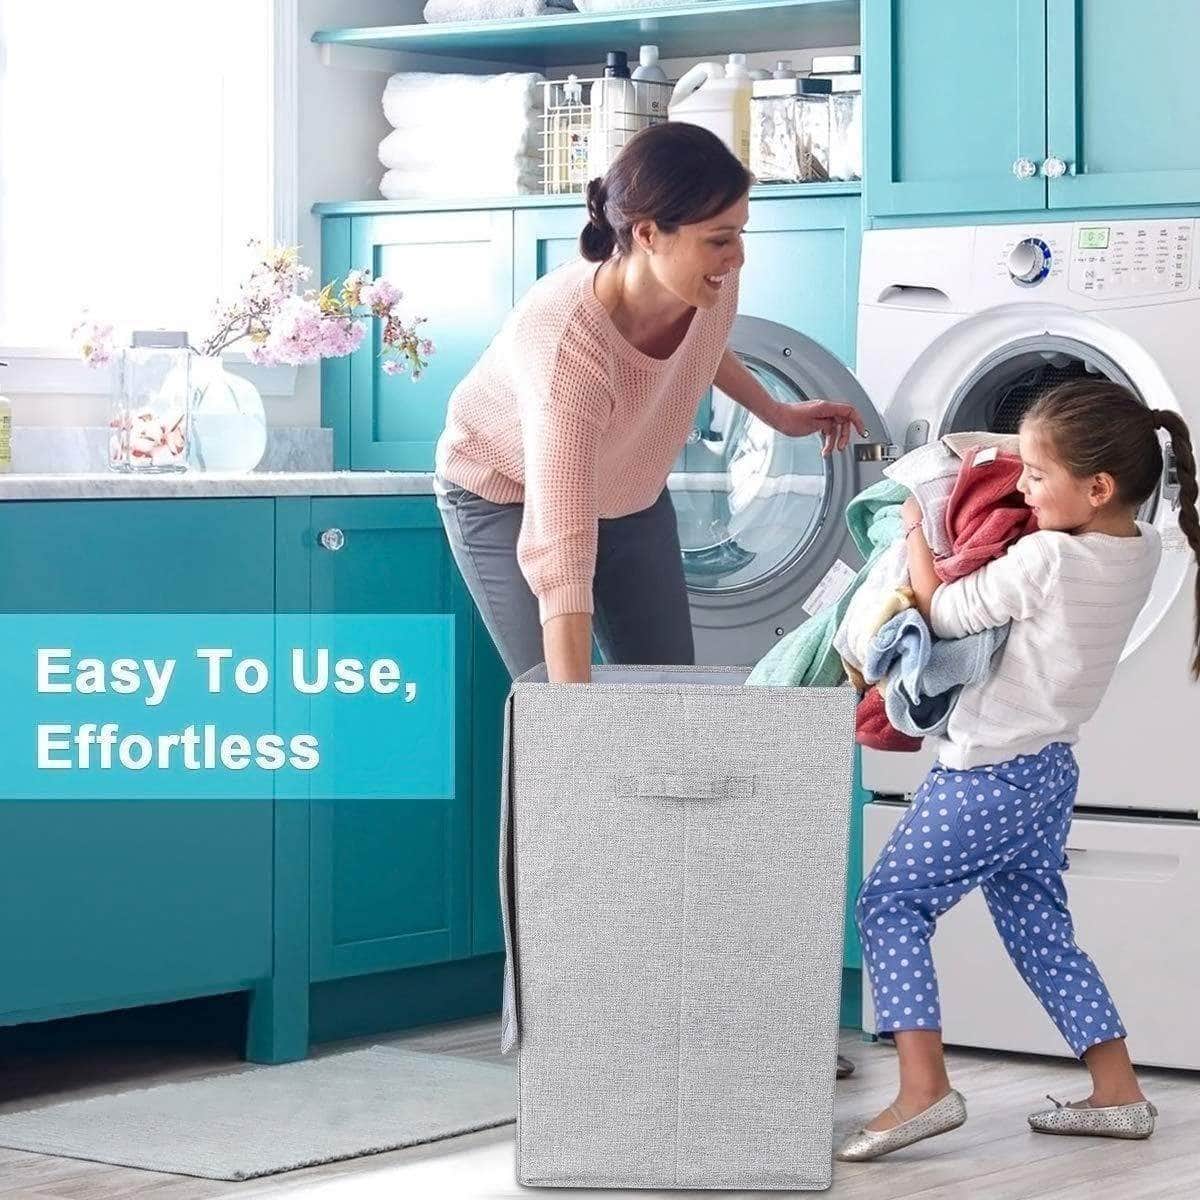 Shop here cleebourg large laundry clothes hamper foldable laundry hamper with lid and handles easily transport laundry dirty clothes basket grey hamper for closet bathroom dorm 90l